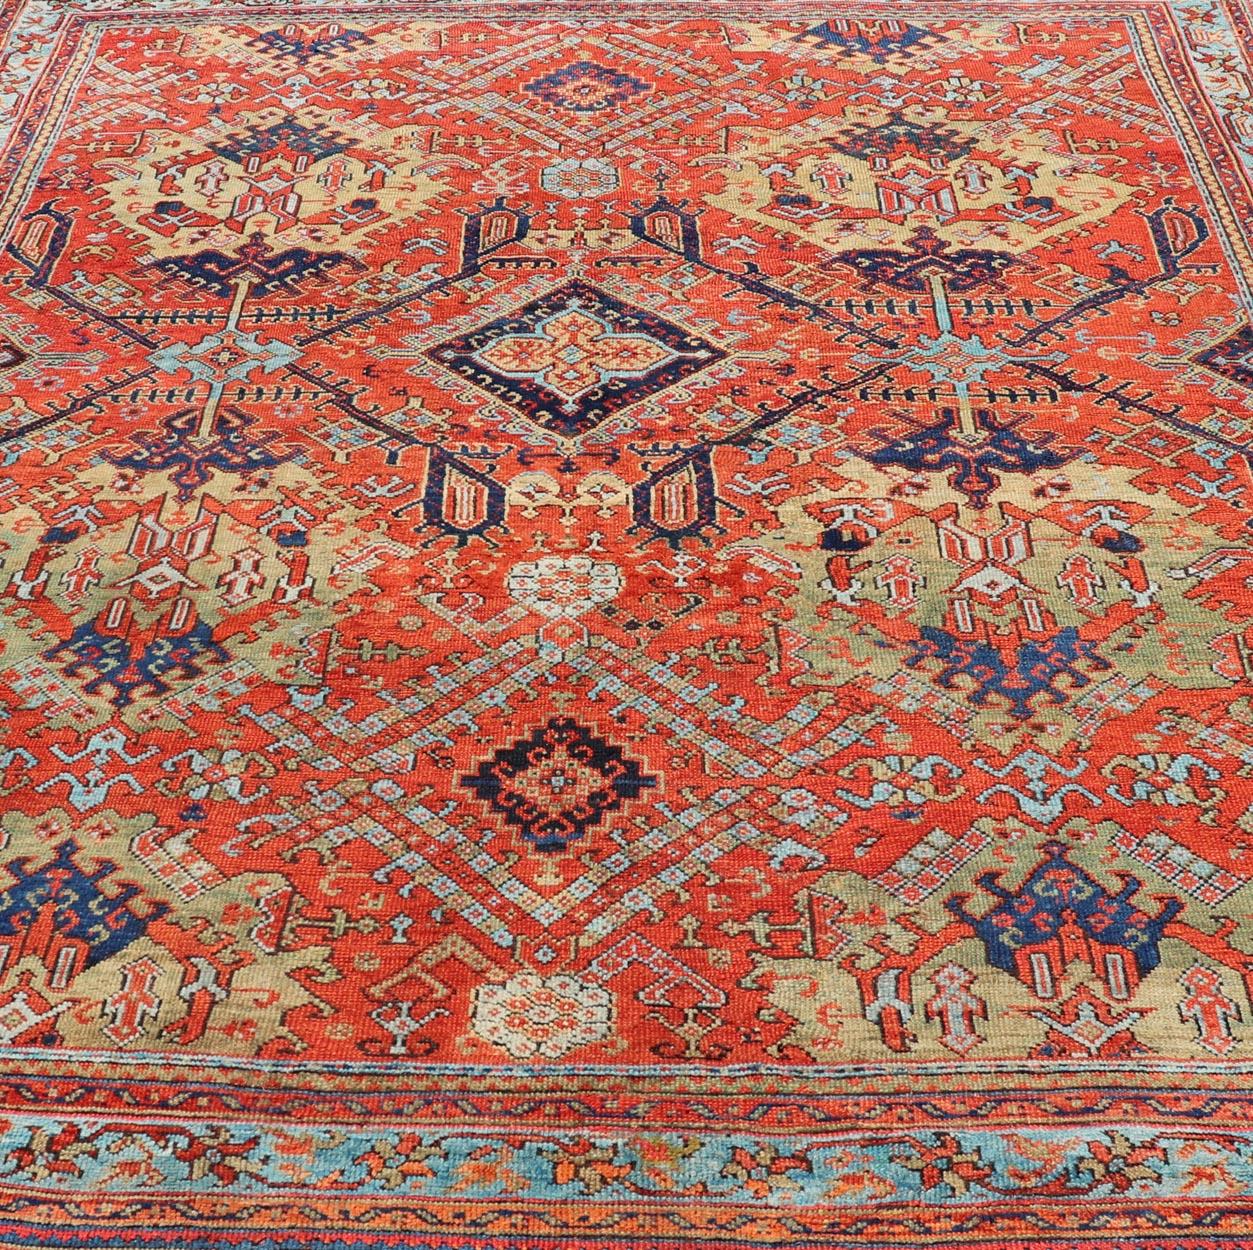 Early 20th Century Antique Oushak Rug in Large Medallions by Keivan Woven Arts.

Keivan Woven Arts / rug code KBE-240205, country of origin / type: Turkey / Oushak, circa 1900. 

Measures: 12'0 x 14'7 

This Keivan Woven Arts Early 20th Century